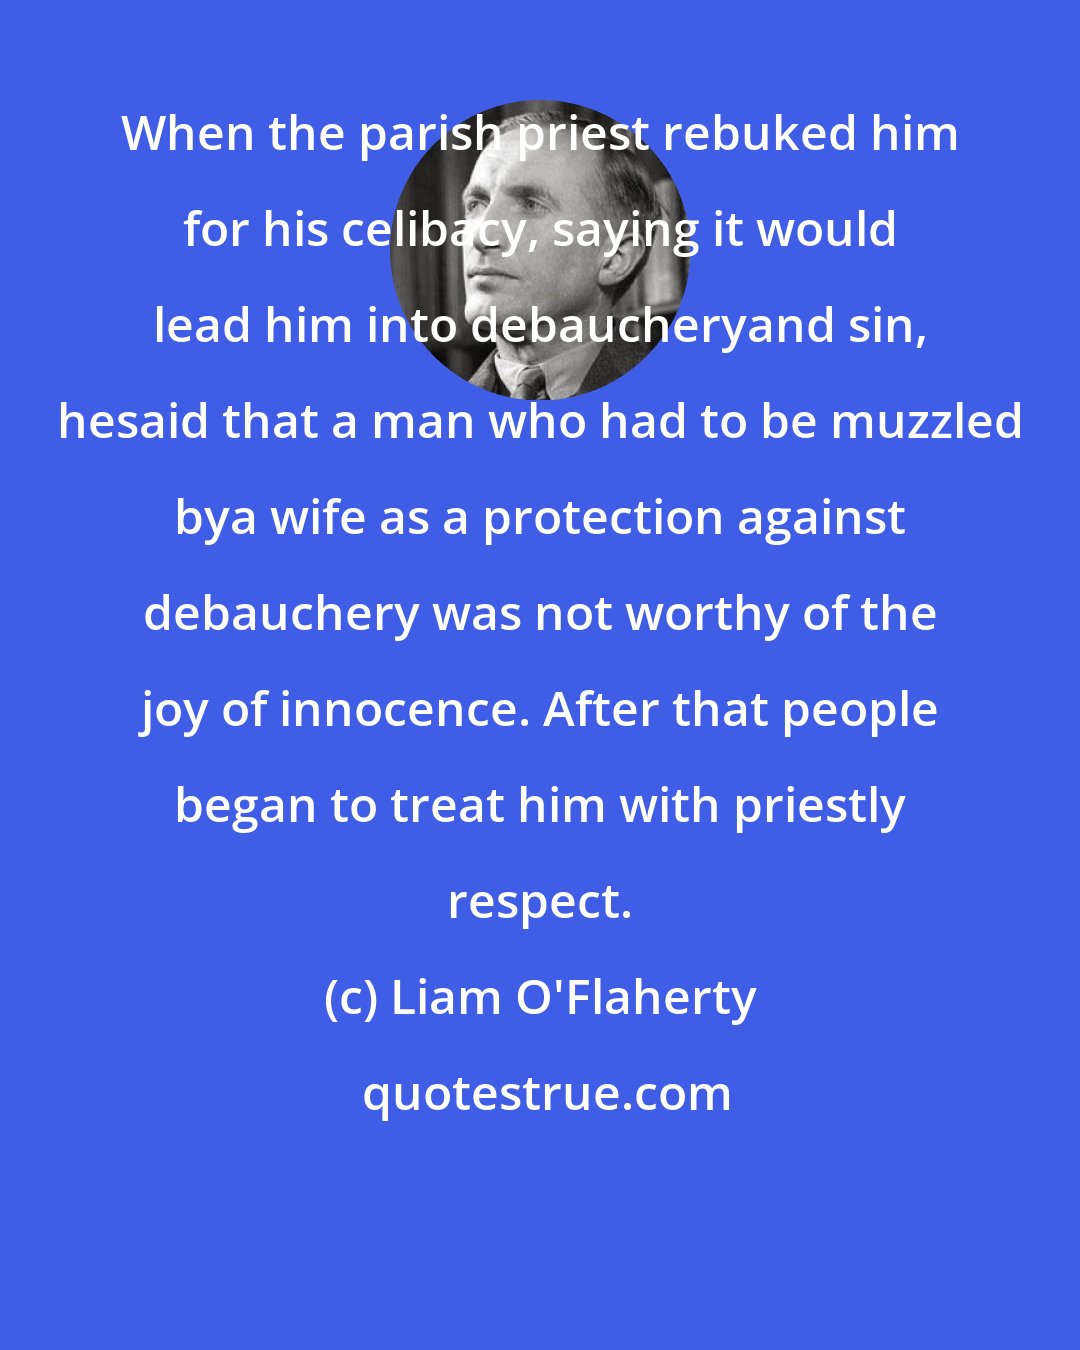 Liam O'Flaherty: When the parish priest rebuked him for his celibacy, saying it would lead him into debaucheryand sin, hesaid that a man who had to be muzzled bya wife as a protection against debauchery was not worthy of the joy of innocence. After that people began to treat him with priestly respect.